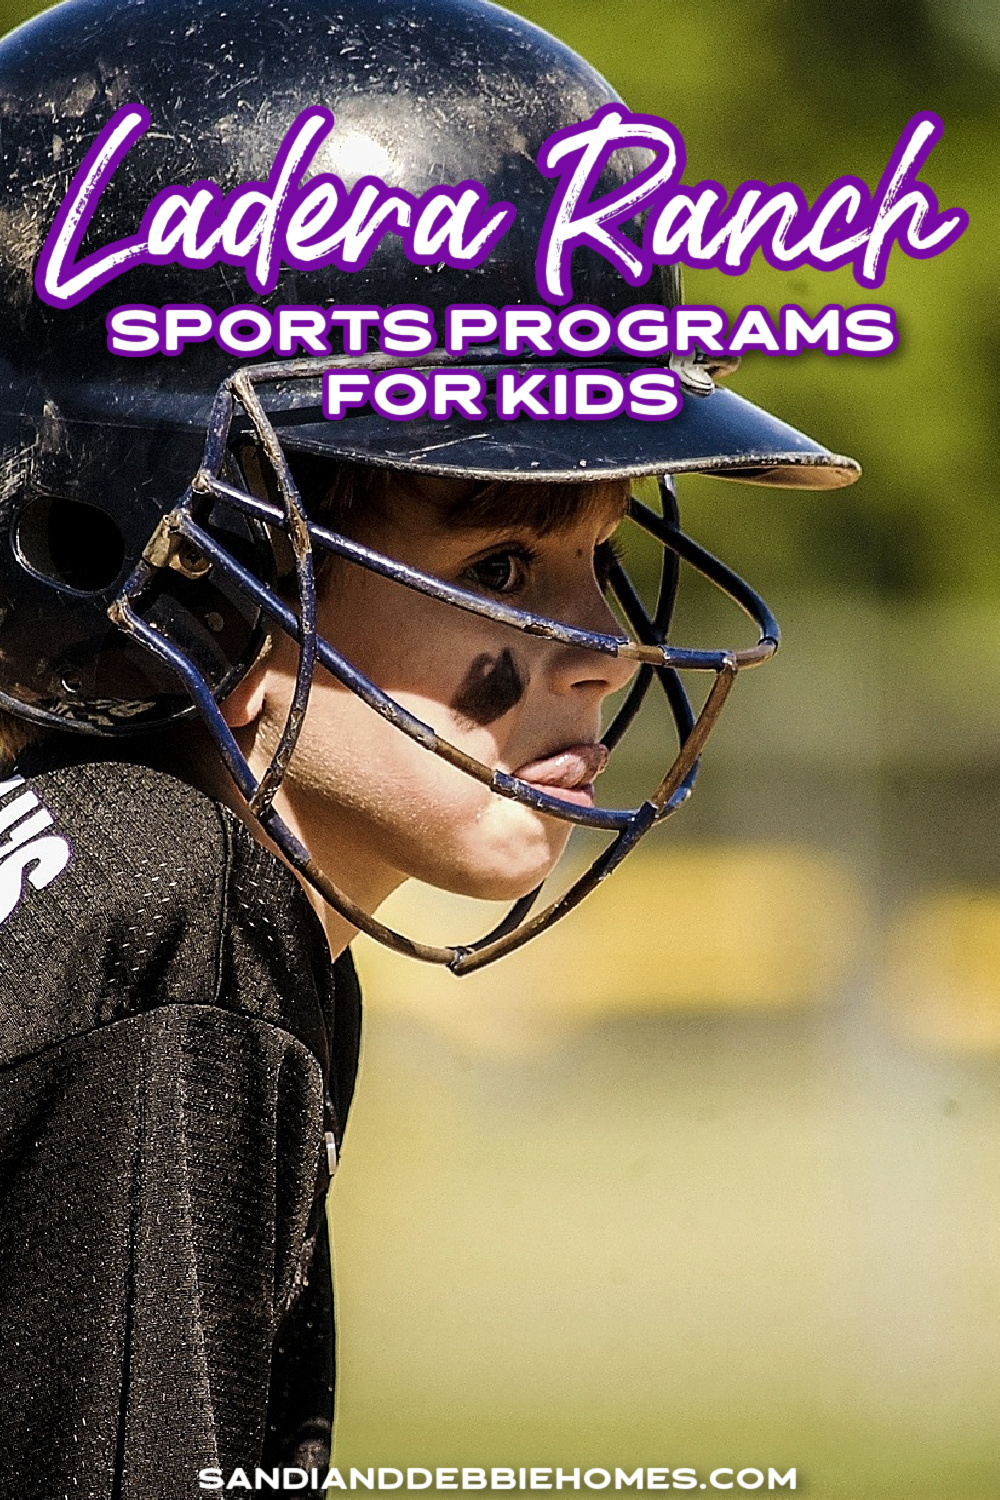 Enroll your child in Ladera Ranch sports for kids and watch them grow and learn while having fun with friends and family.